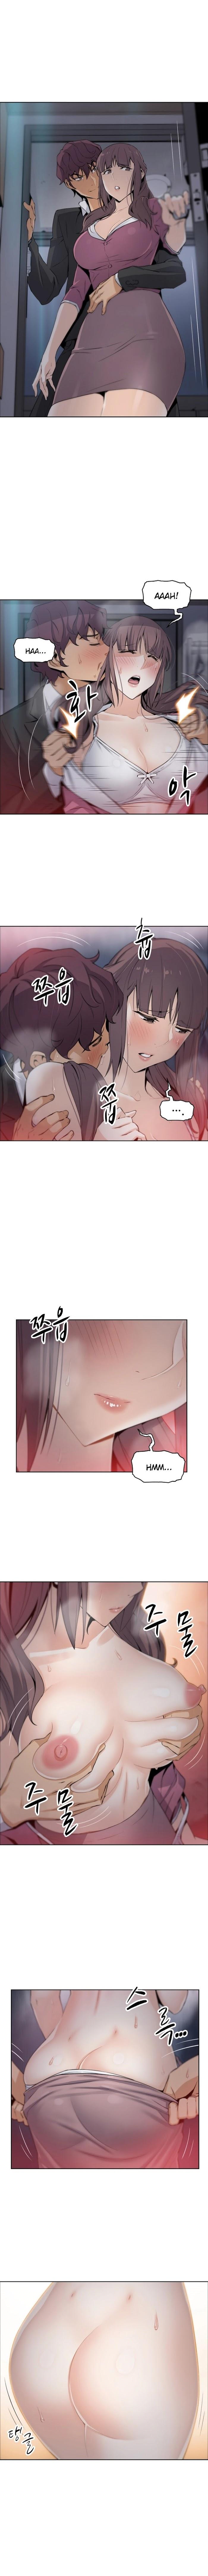 Housekeeper [Neck Pillow, Paper] Ch.49/49 [English] [Manhwa PDF] Completed 138